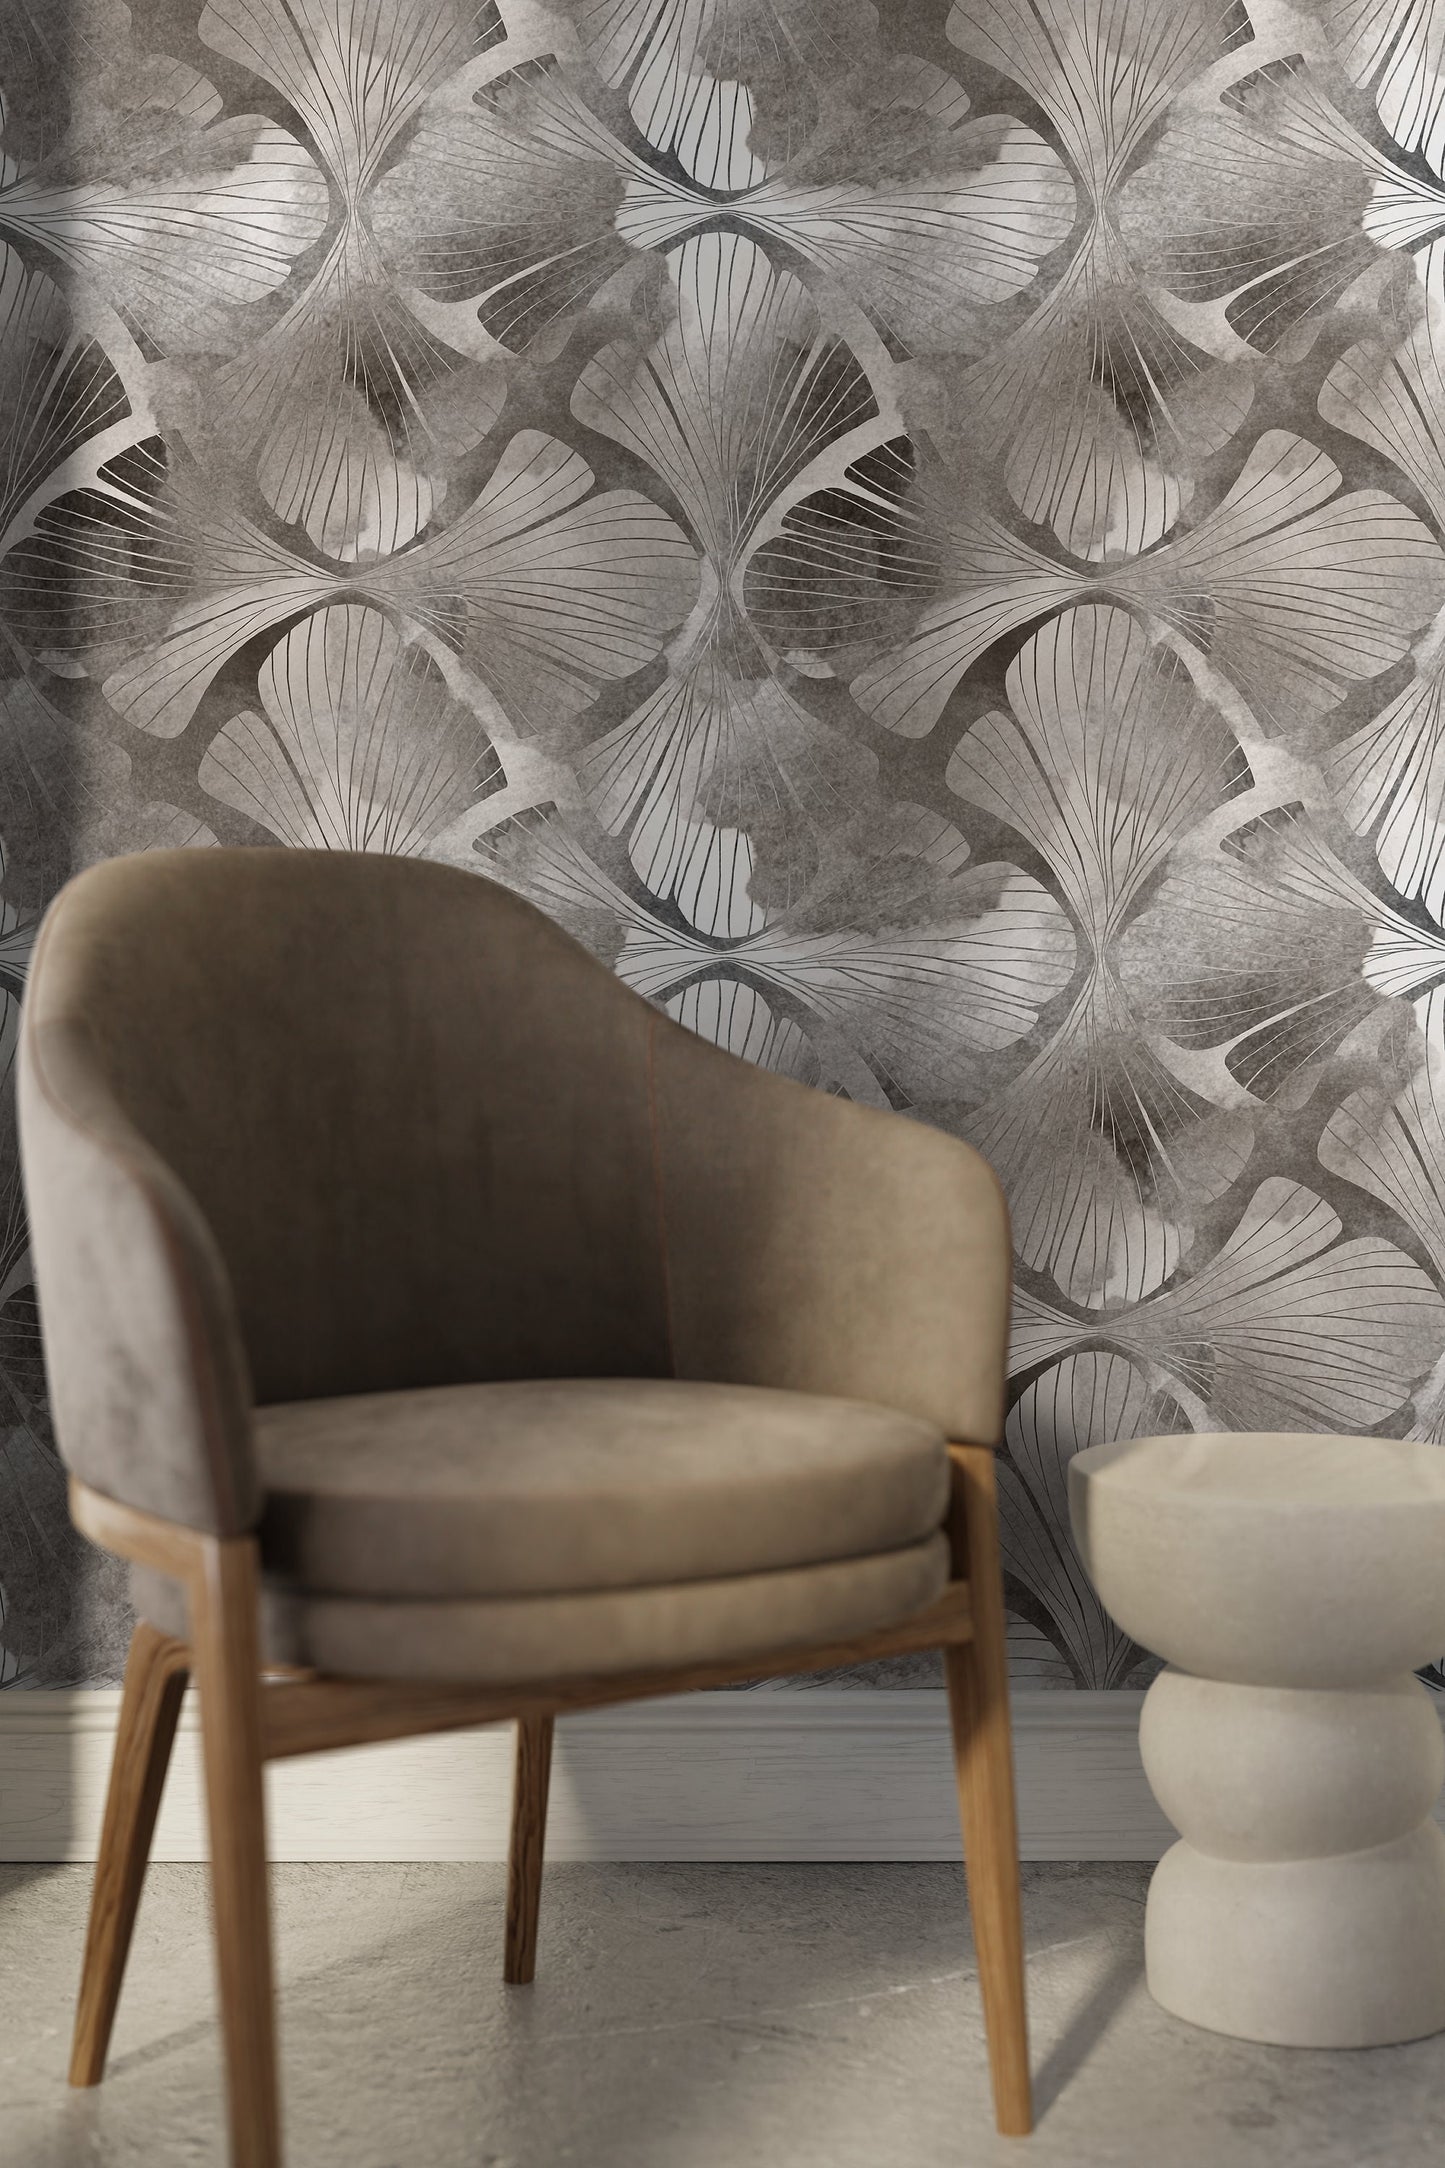 Gray Abstract Floral Wallpaper / Peel and Stick Wallpaper Removable Wallpaper Home Decor Wall Art Wall Decor Room Decor - C865